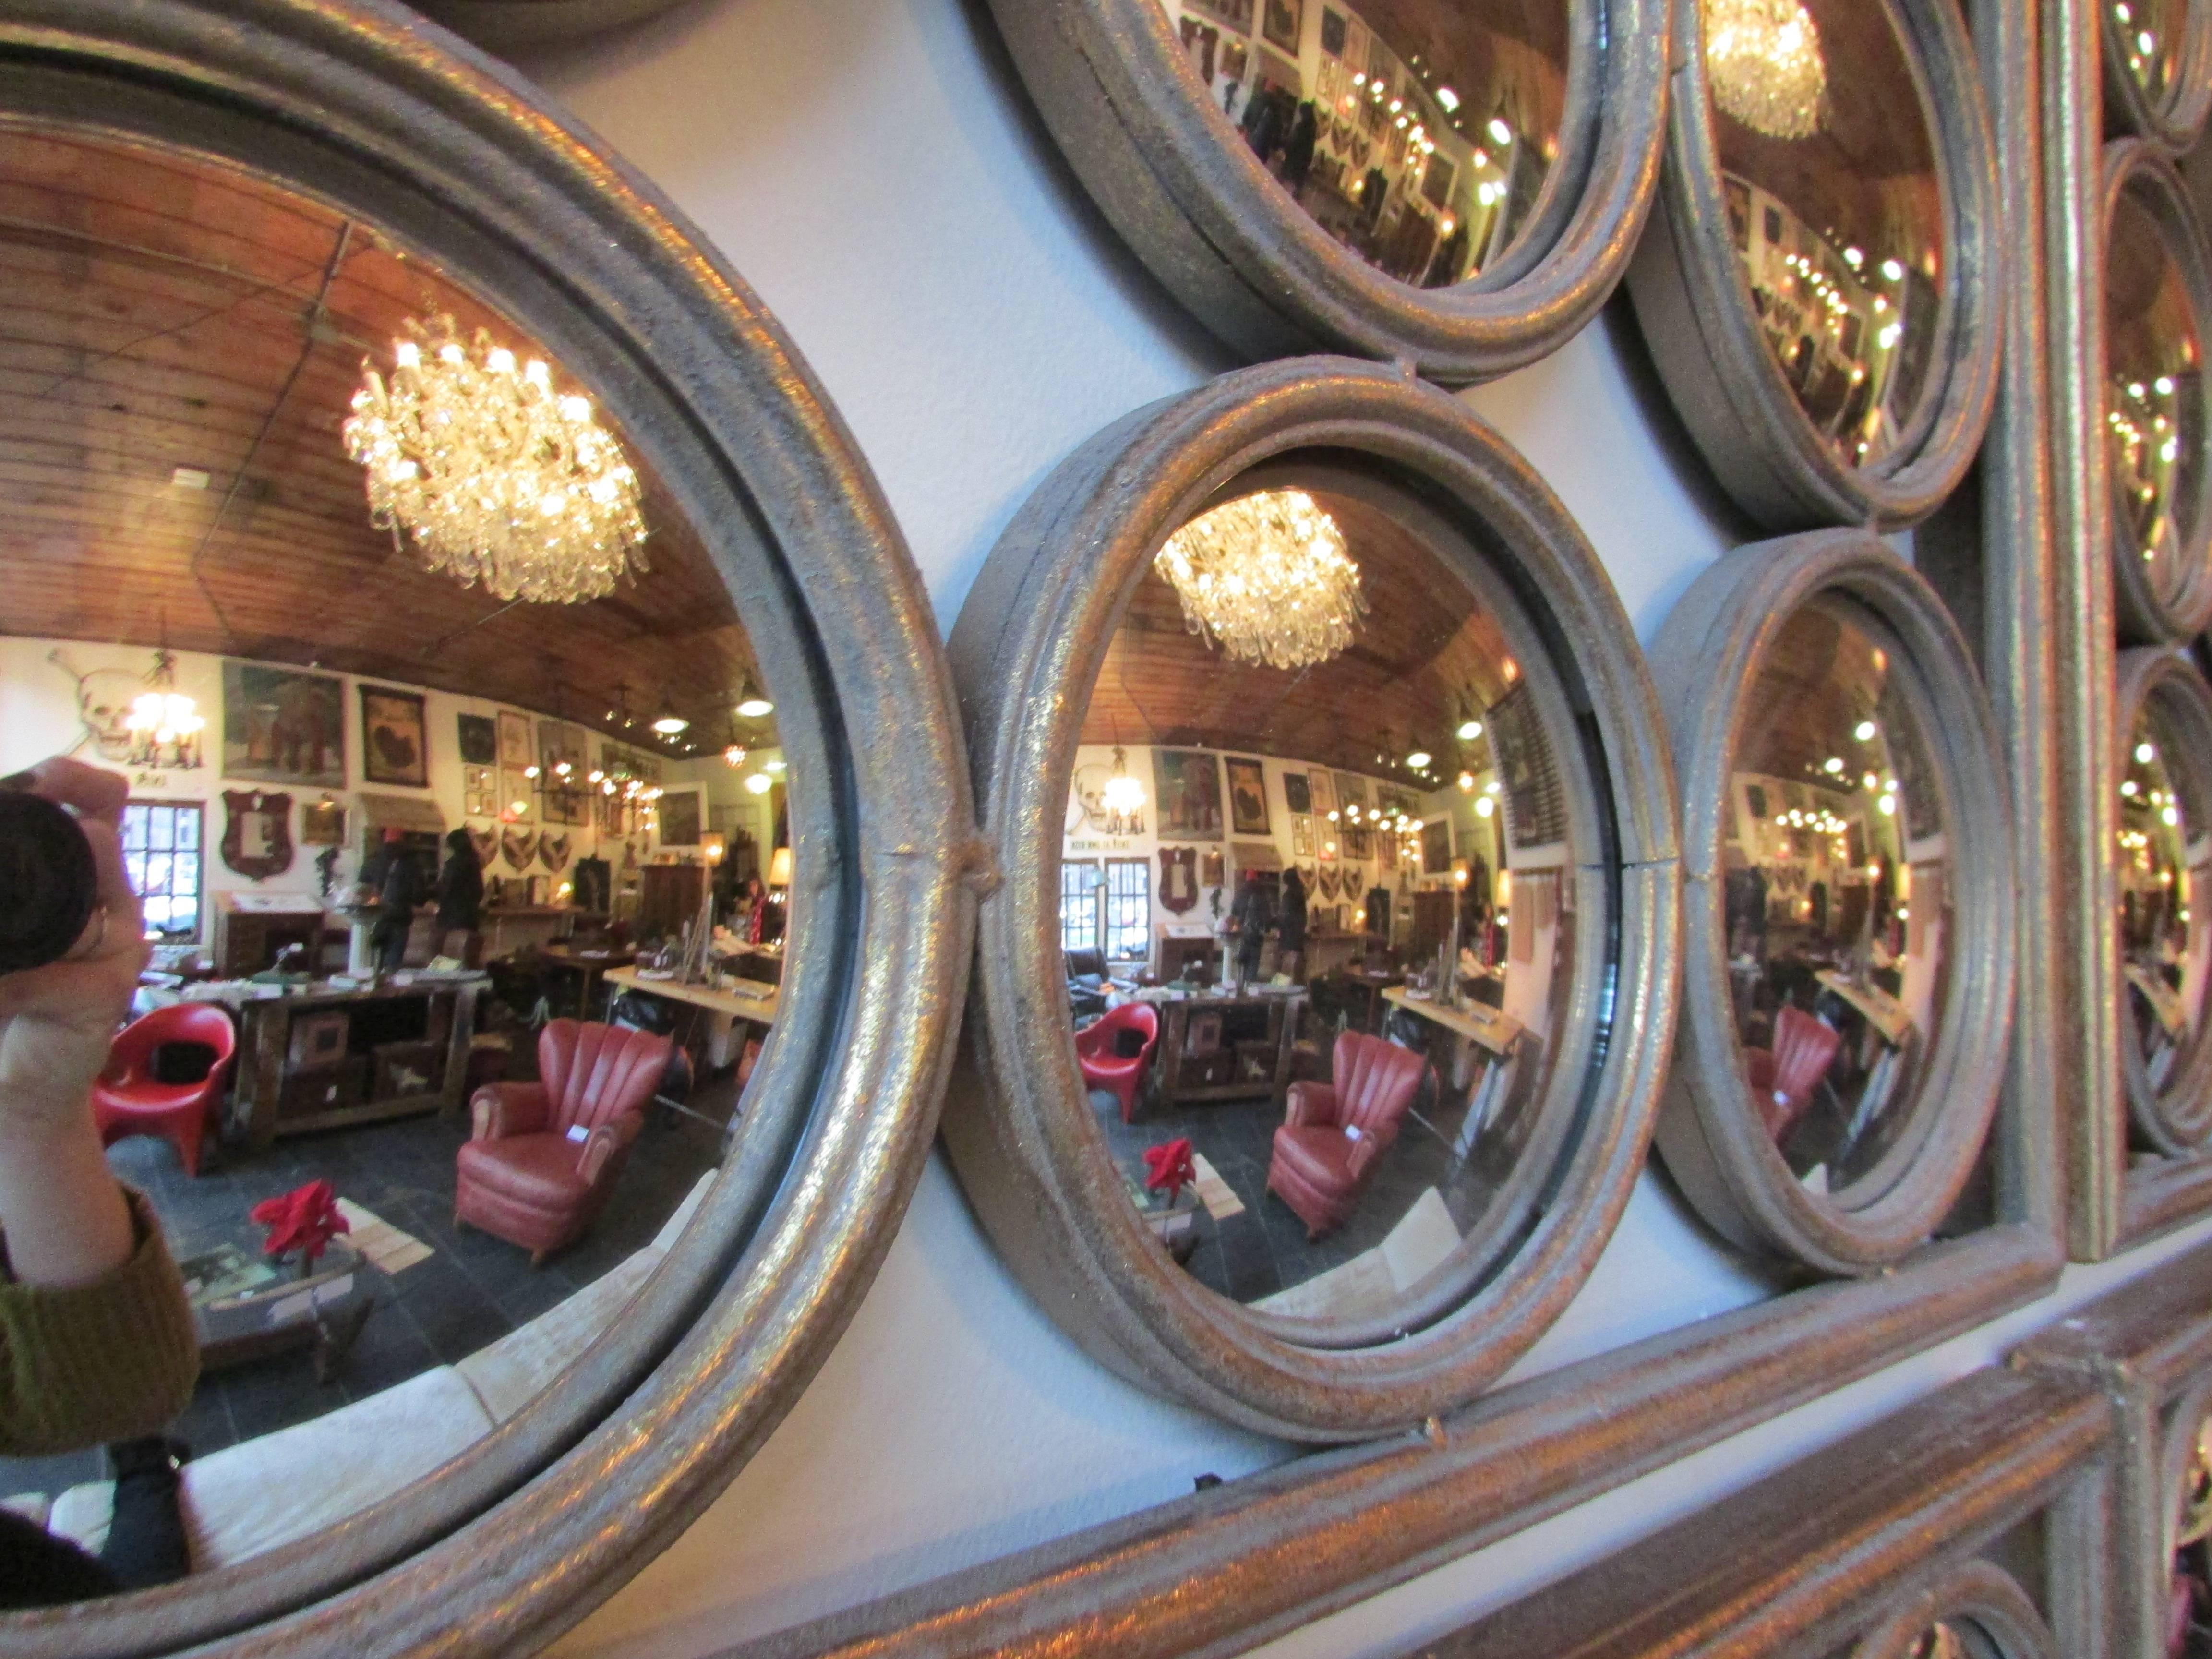 This is a 36 lens convex mirror in a gold painted steel frame that came out of a hotel in Paris. This unique mirror makes a bold statement on its own or an even more dramatic statement when grouped together.